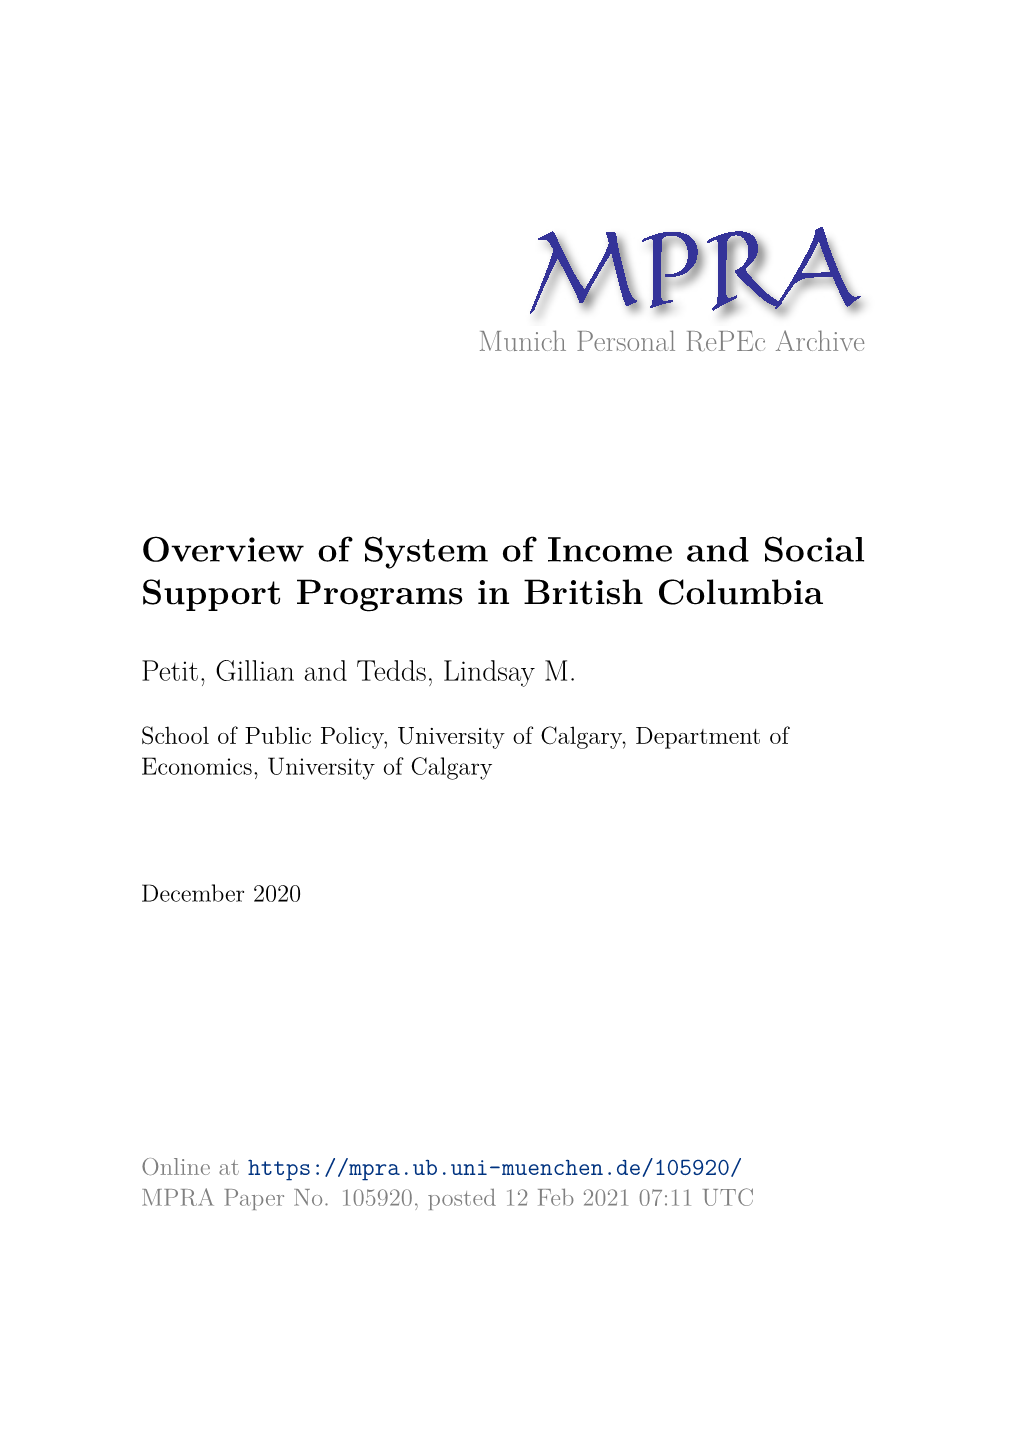 Overview of System of Income and Social Support Programs in British Columbia